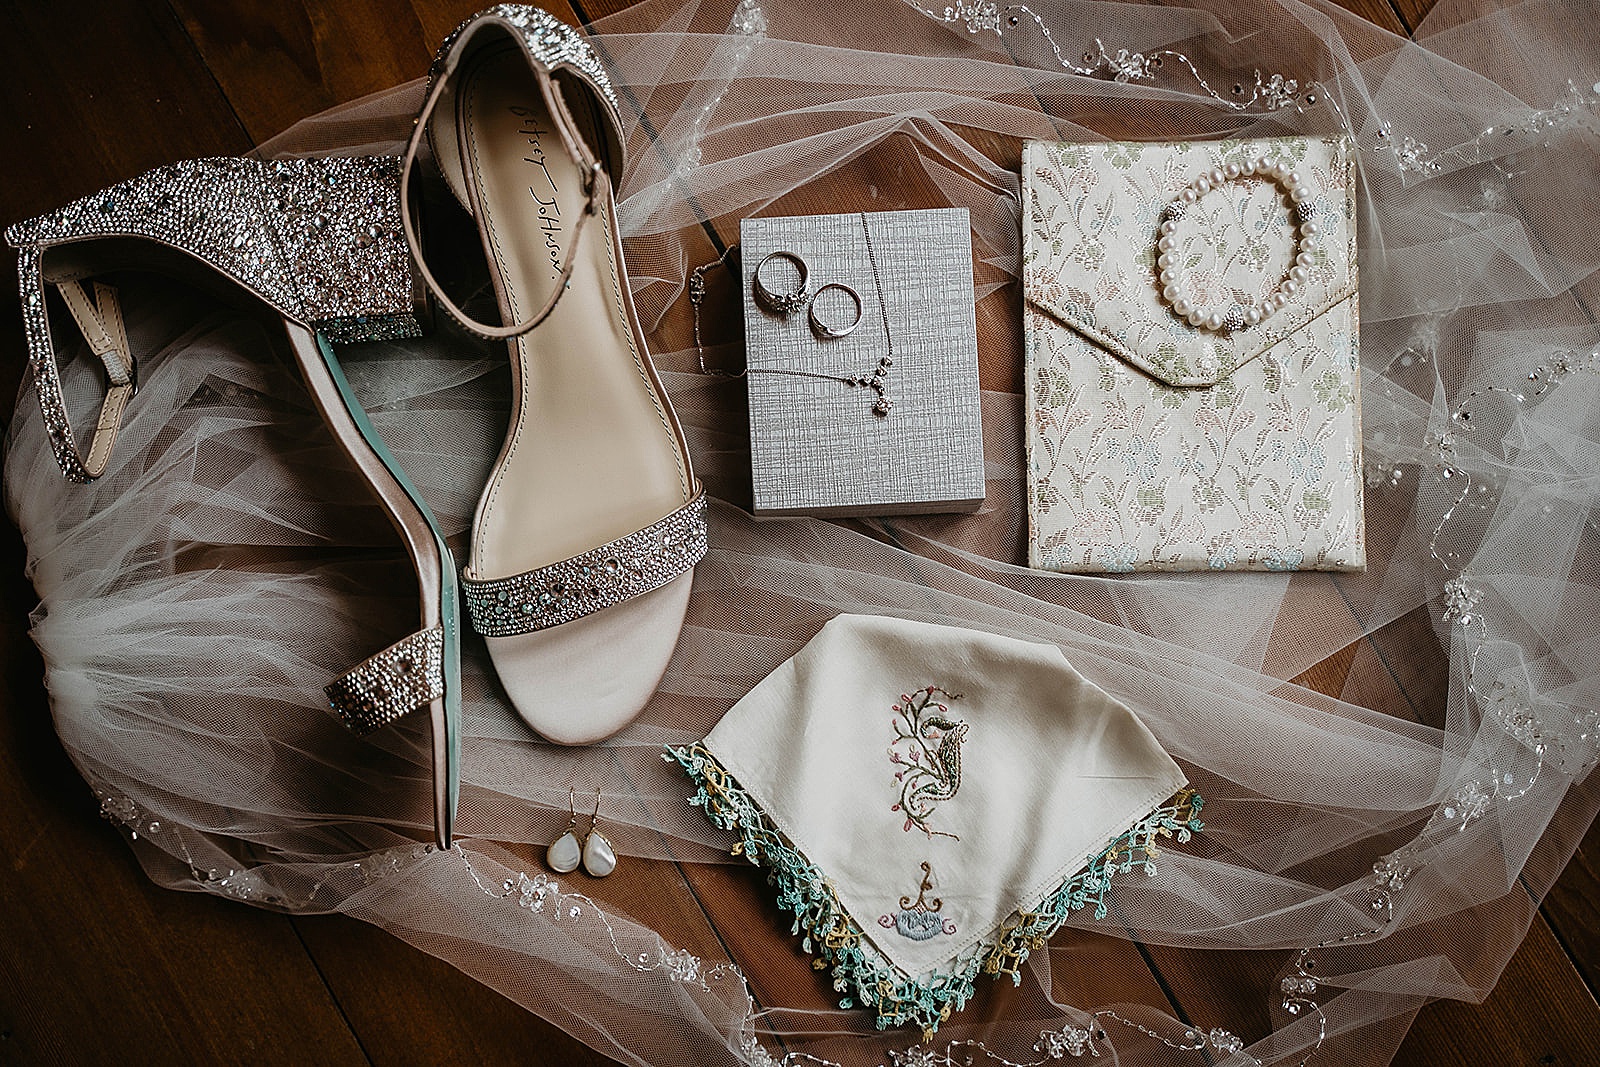 Rustic Colorado Elopement Details by Krystal Capone Photography